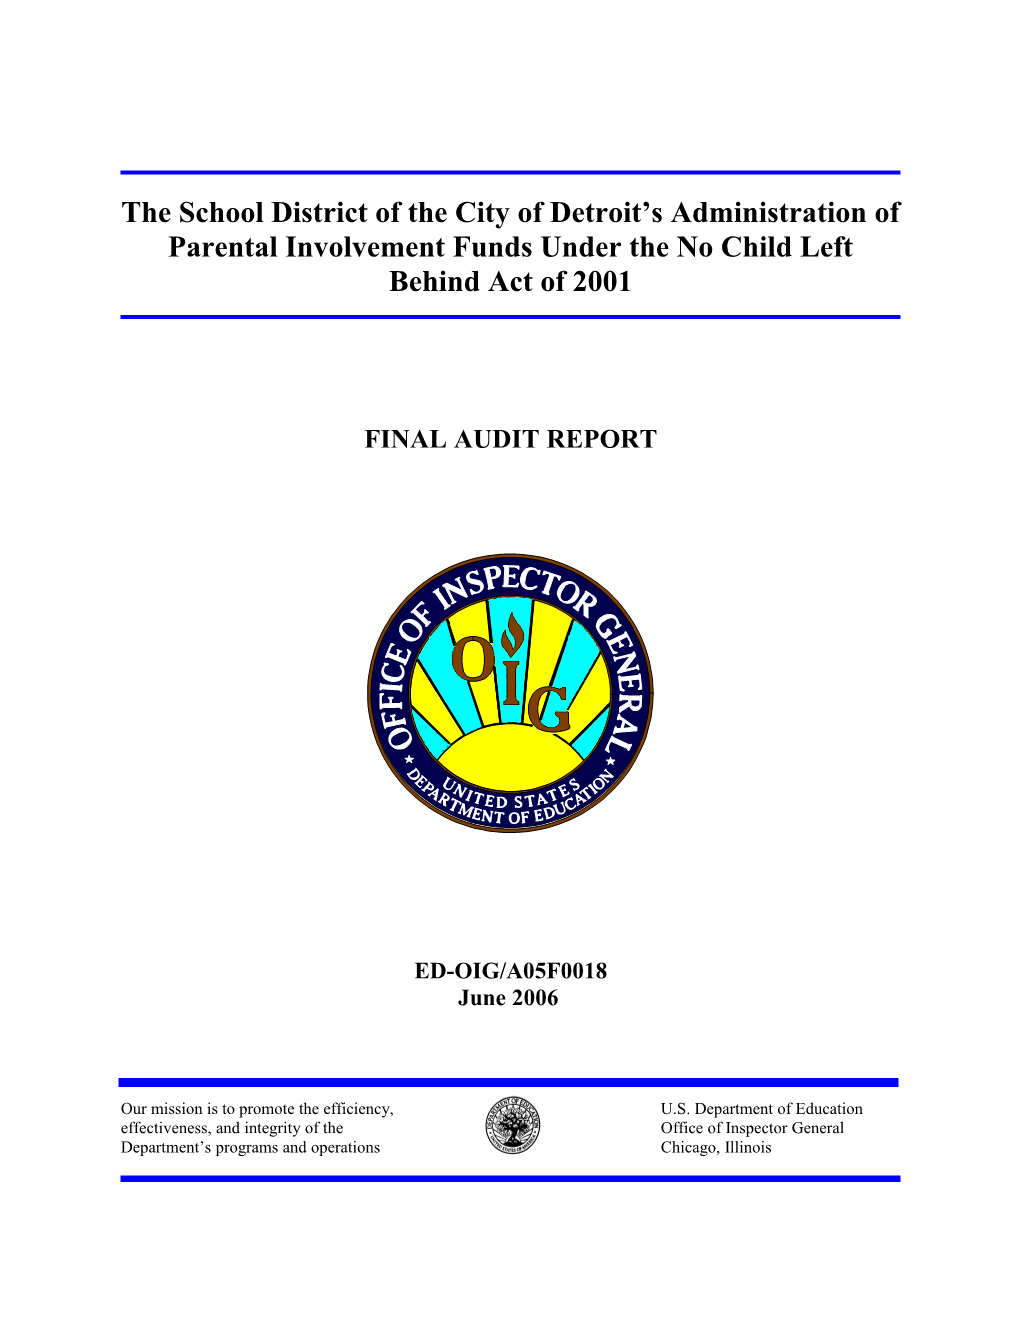 The School District of the City of Detroit S Administration of Parental Involvement Funds